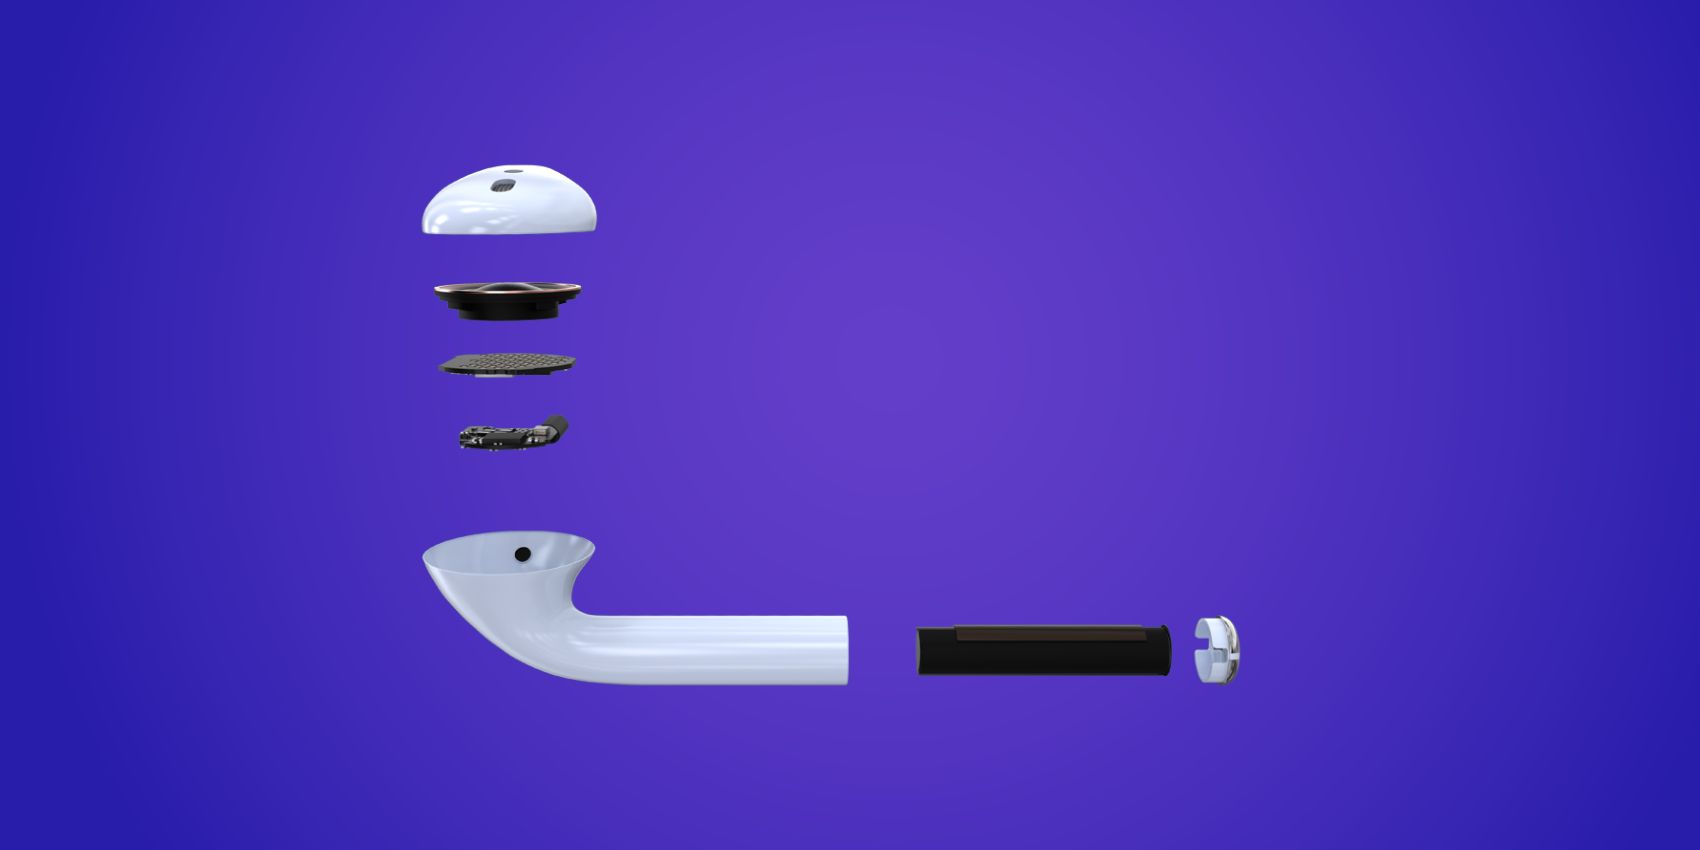 Exploded view of Apple AirPod earbud